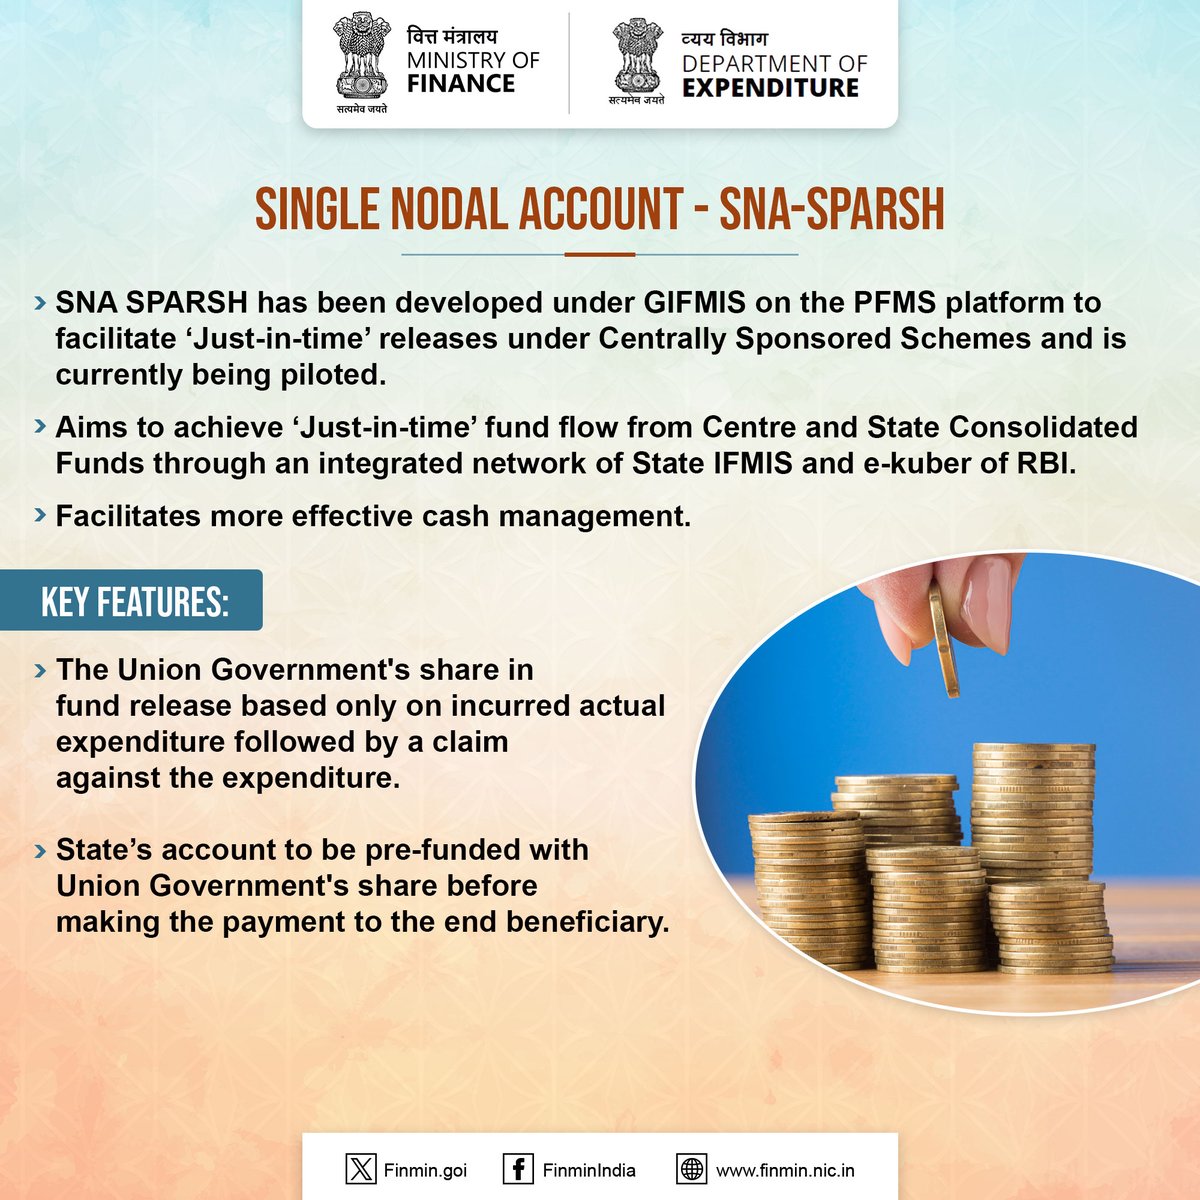 #FinMinReview2023 : With three states already onboarded 7 more in the pipeline, Single Nodal Account #SNASPARSH aims to facilitate more effective cash management. #ViksitBharat